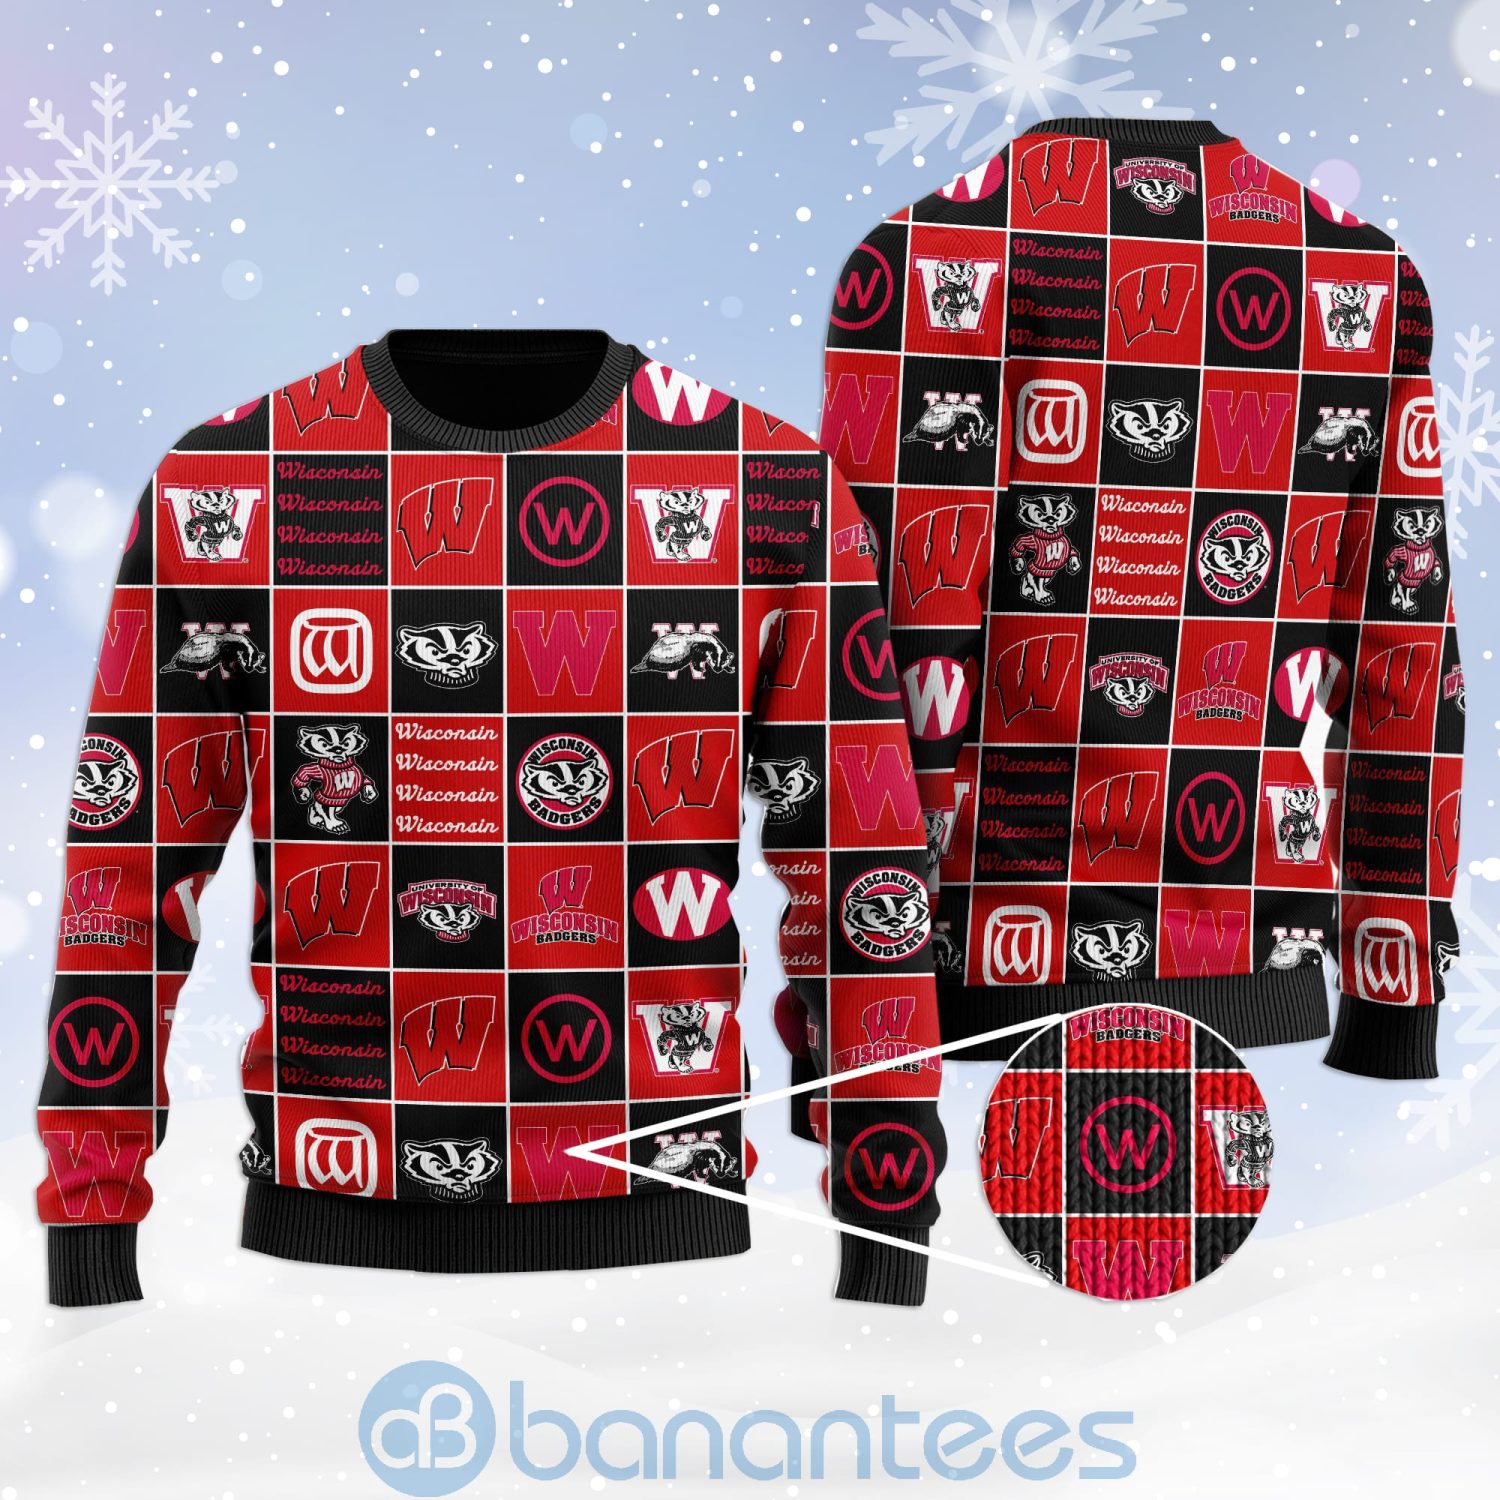 Wisconsin Badgers Football Team Logo Ugly Christmas 3D Sweater